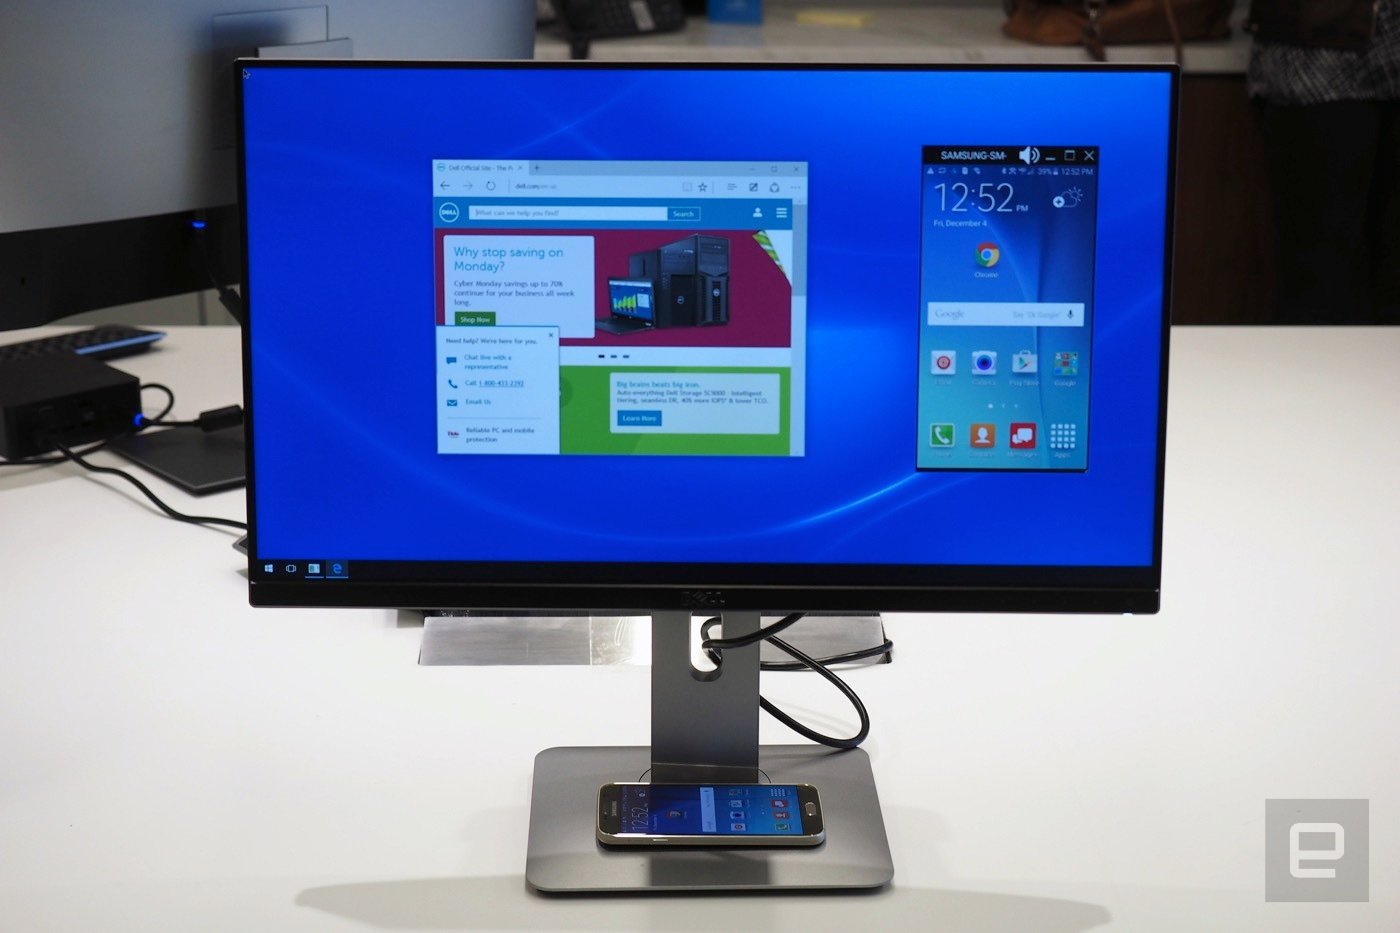 Dell's 23 inch Wireless Monitor seems made for Continuum for phones -  MSPoweruser